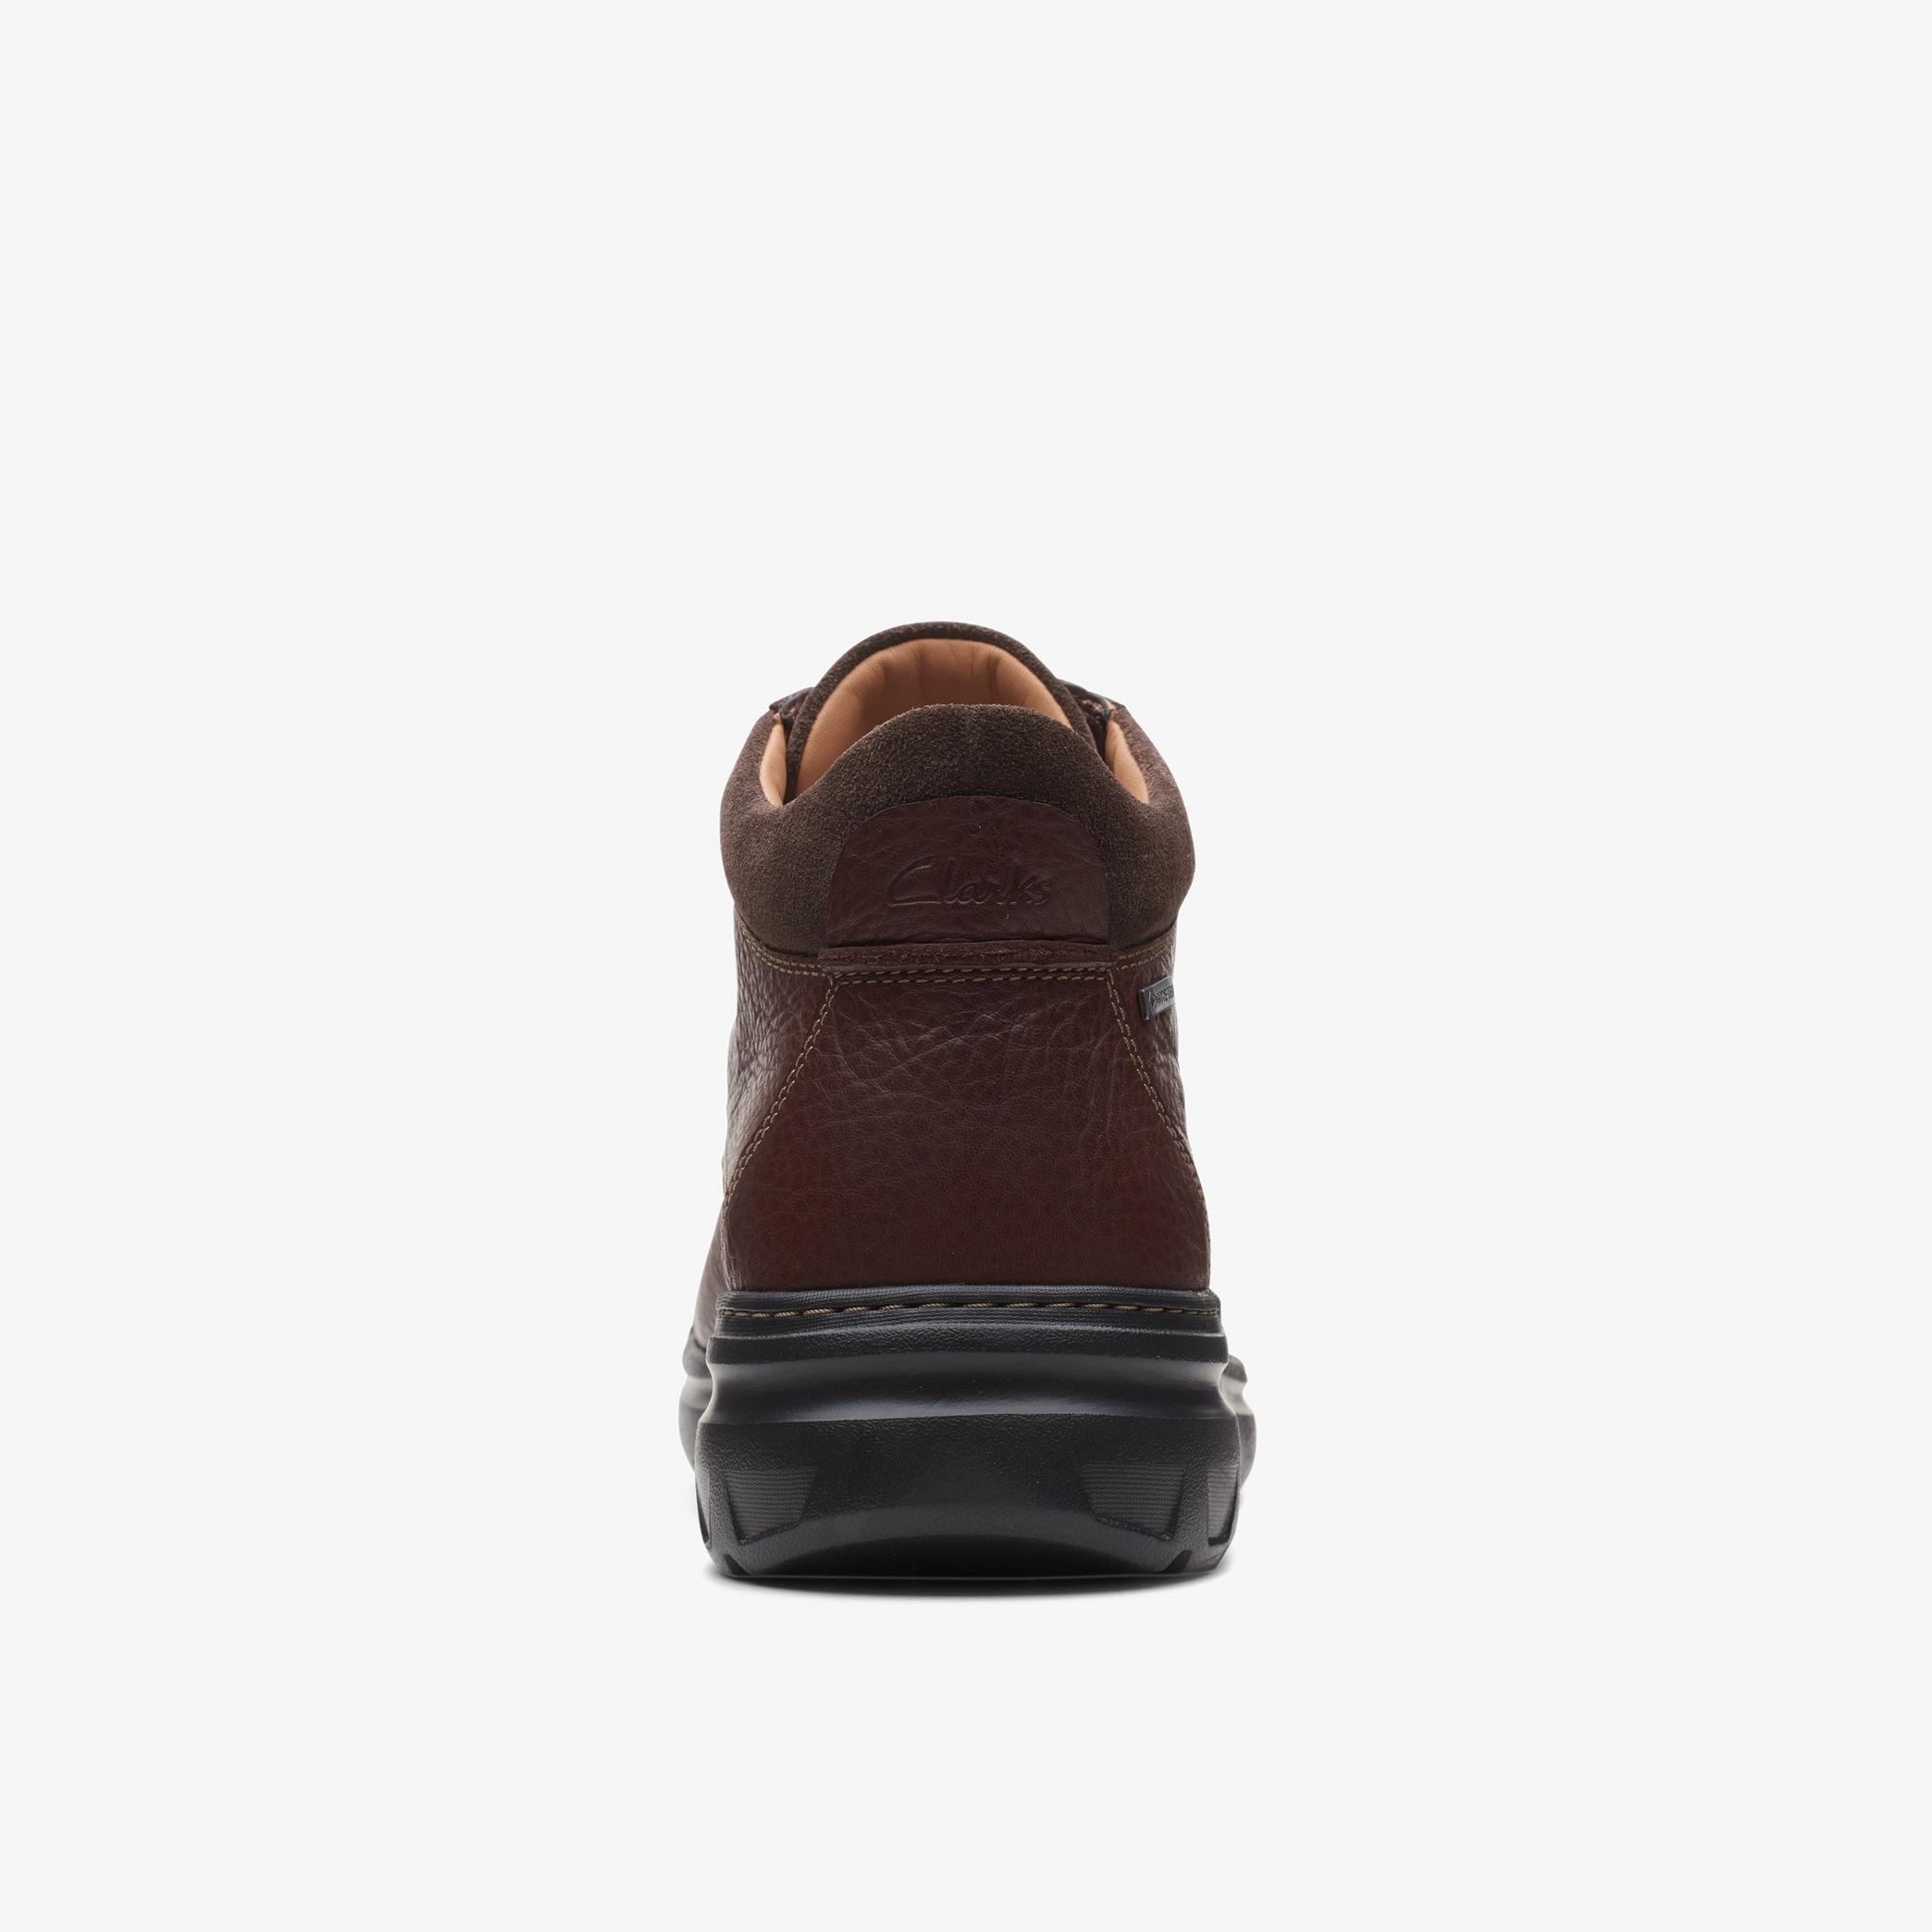 Rockie2 Up GTX Mahogany Leather Ankle Boots, view 5 of 6